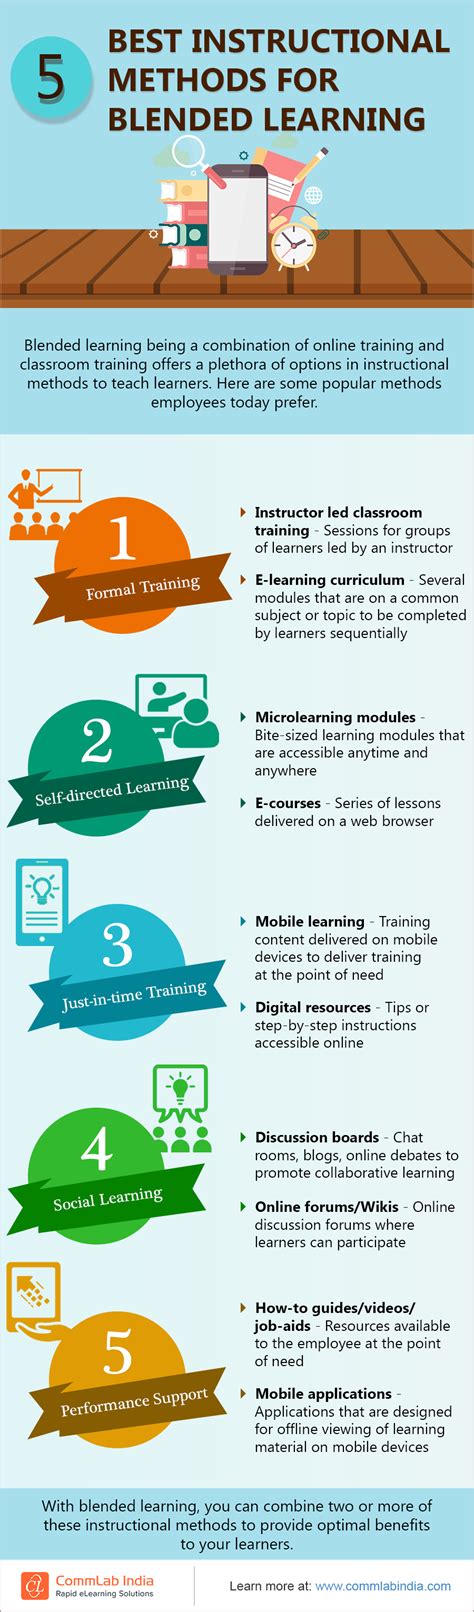 This Infographic Lists Some Of The Instructional Methods You Can Use For Your Blended Learning